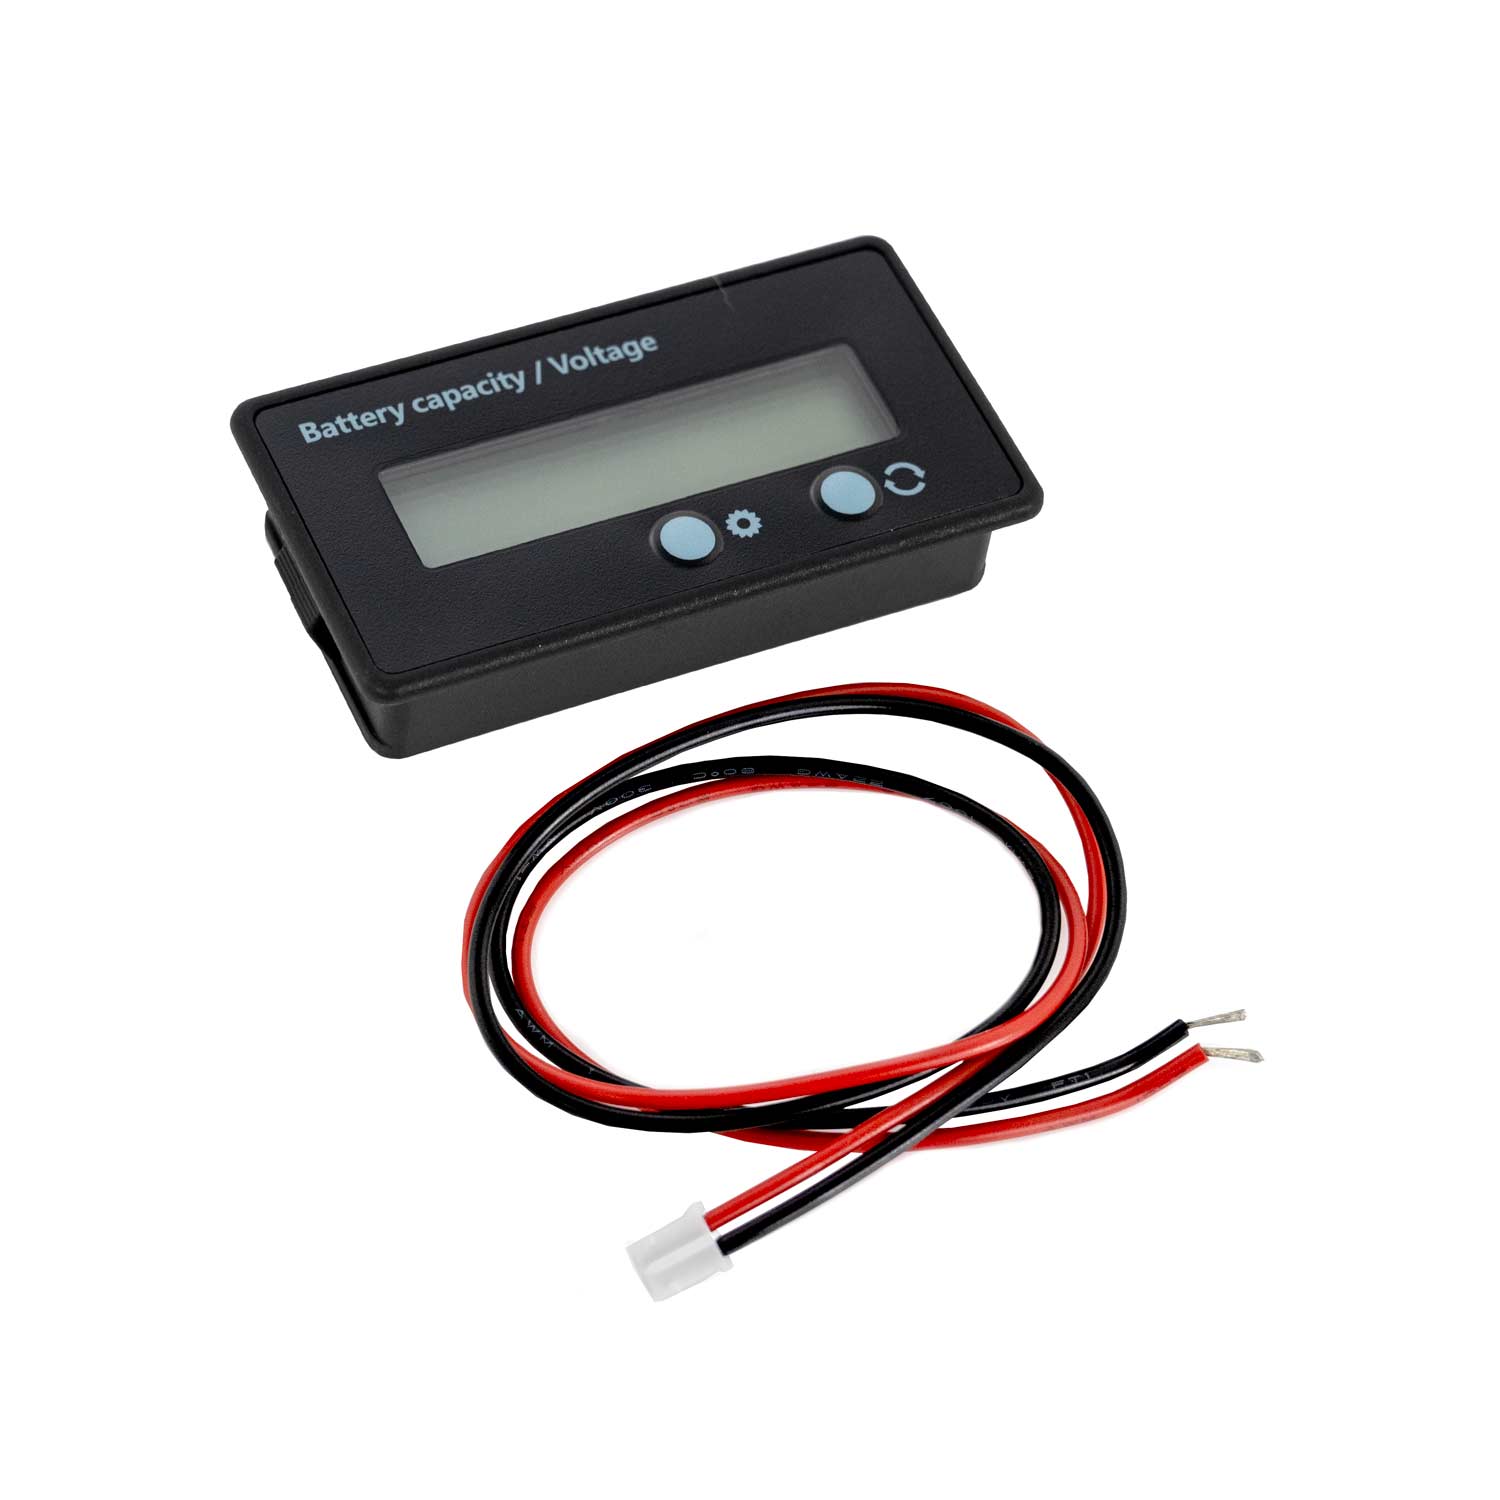 Battery Capacity and Voltage Meter